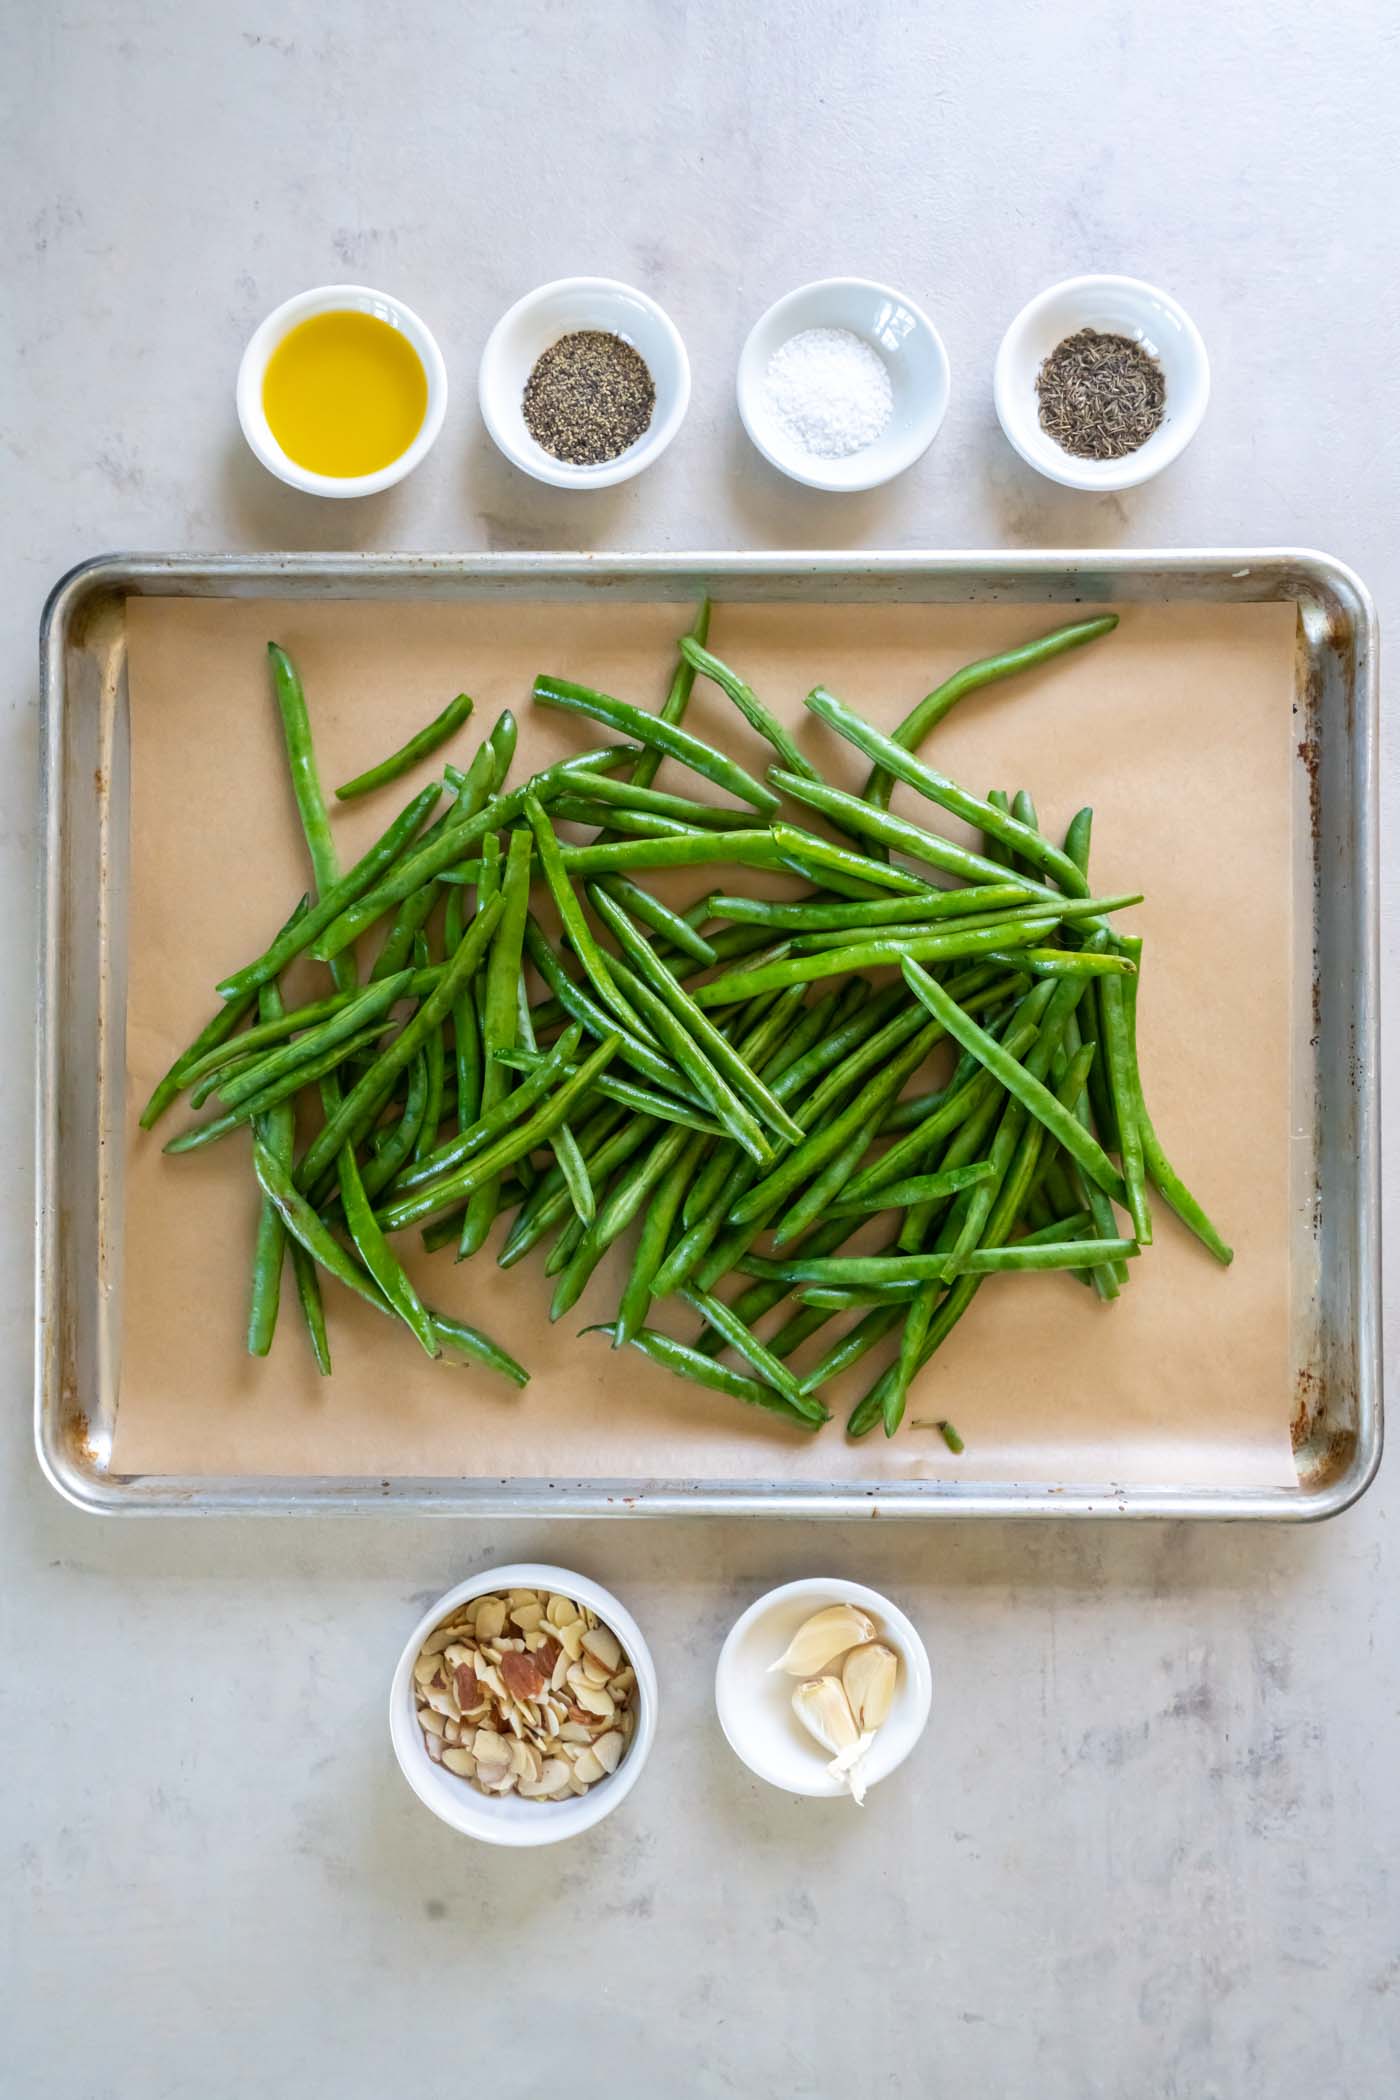 Trimmed green beans on a parchment paper lined baking sheet with other recipe ingredients around the baking sheet.